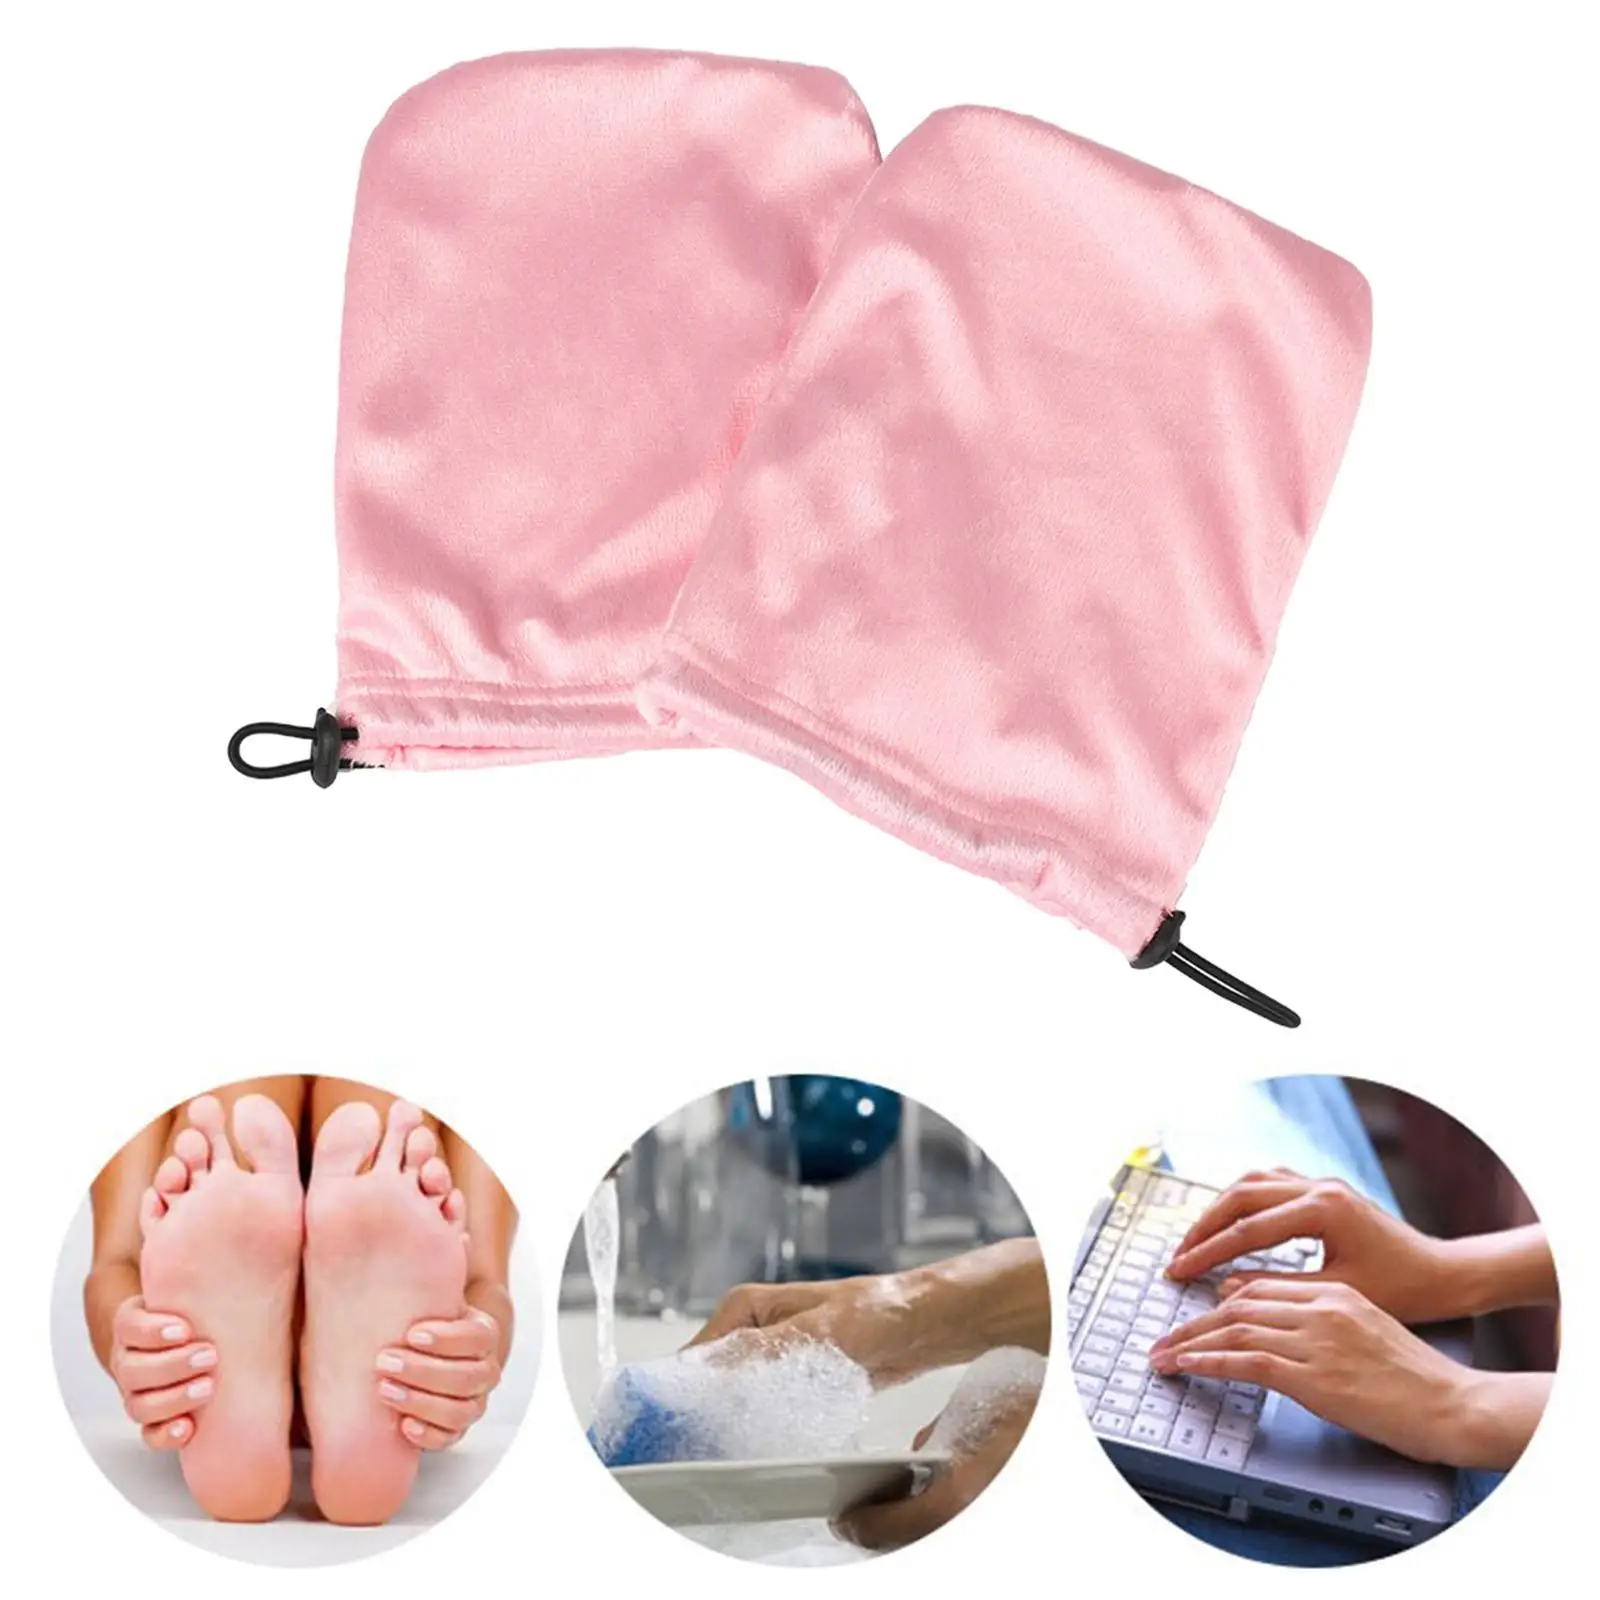 2 Pieces Paraffin Wax Mitts for Hand and Feet Moisturizing Infrared Machine Keep Warm Heat Wax Mitten Cover Bags Foot SPA Liners